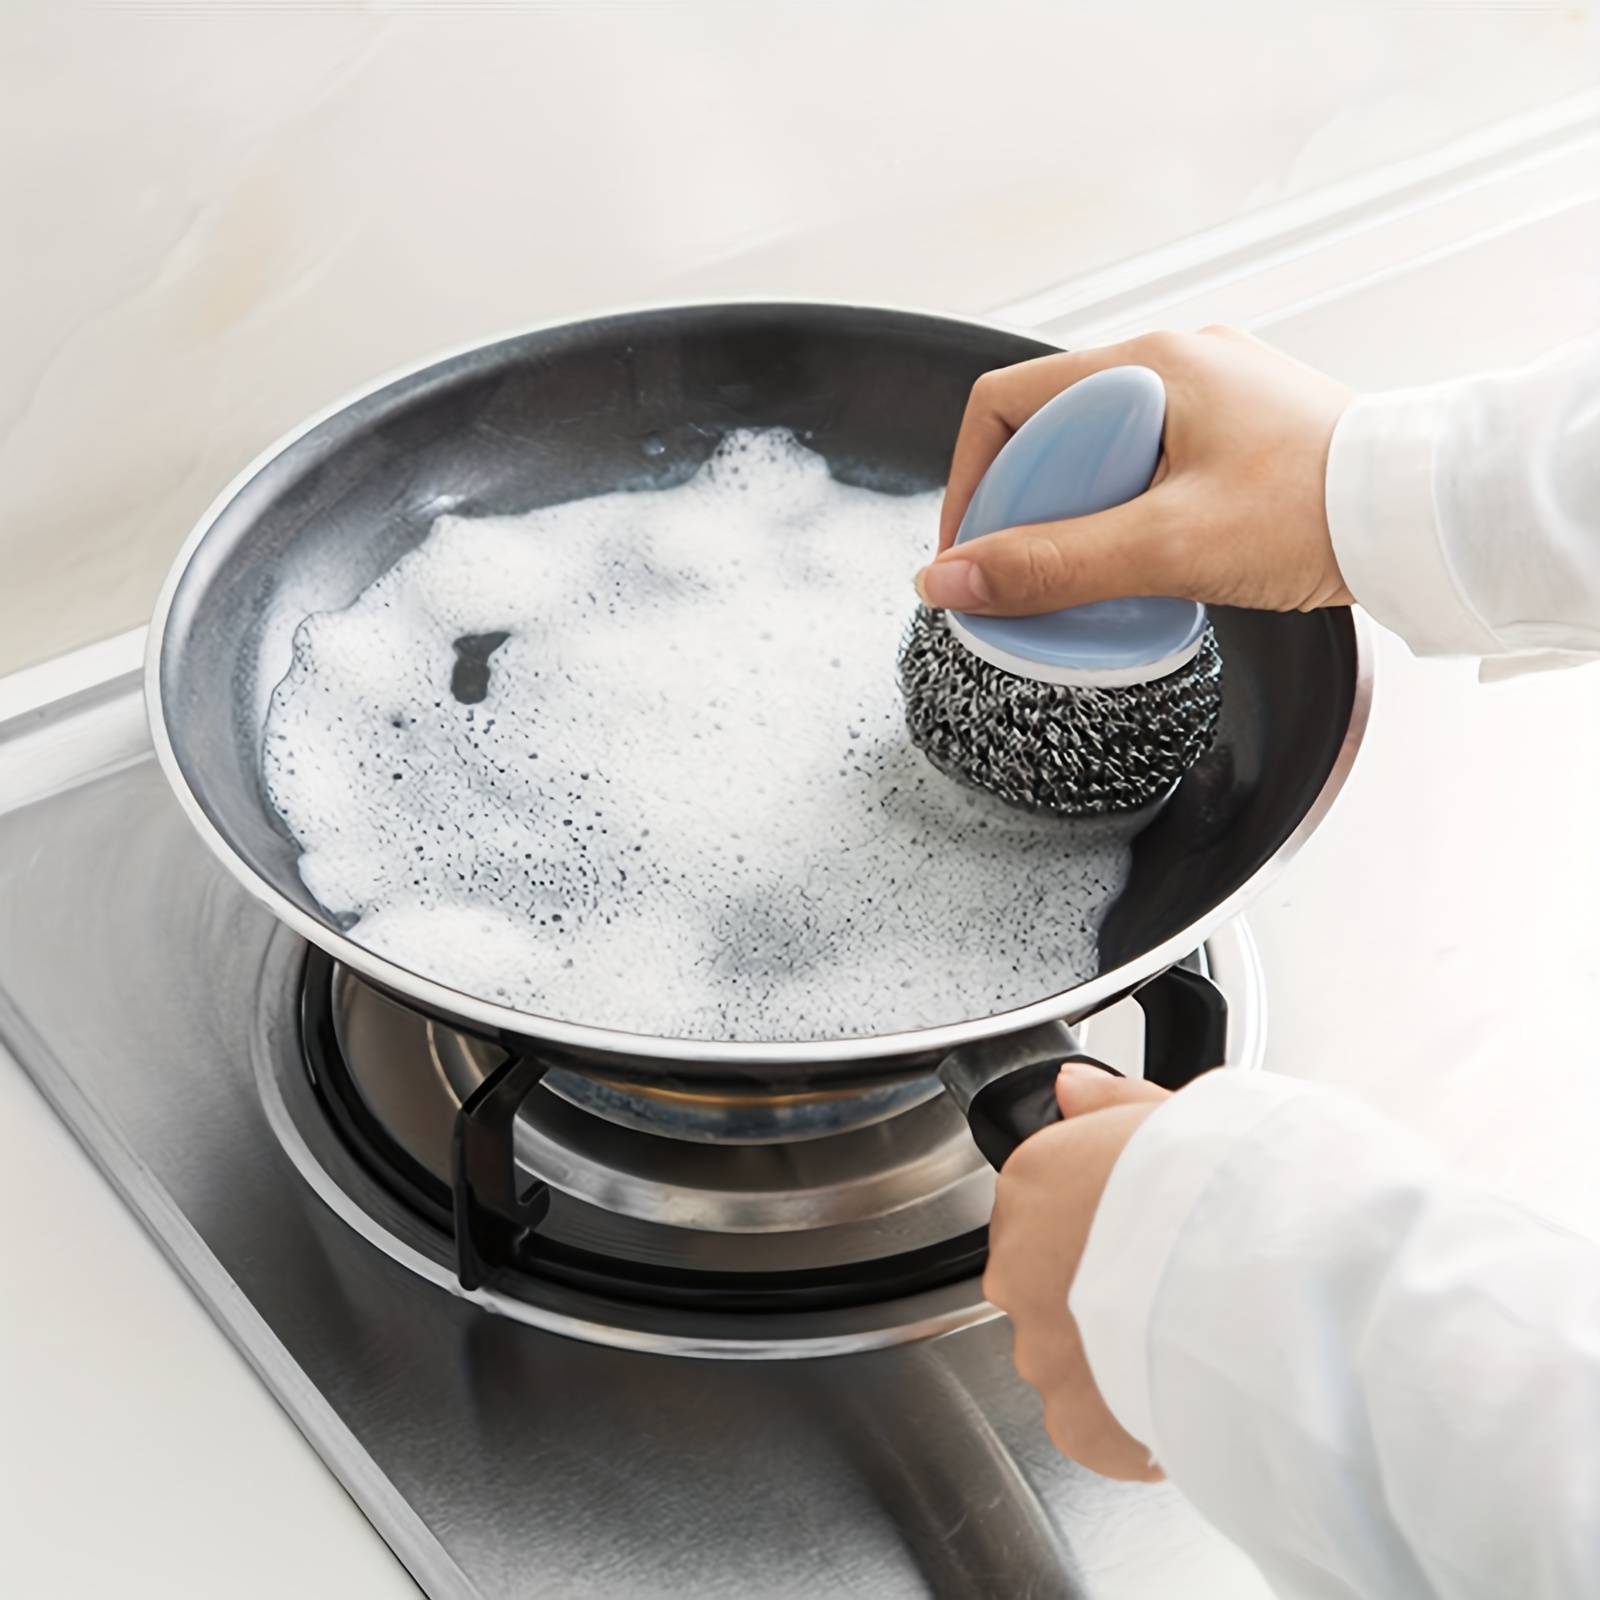 2 In 1 Cleaning Brushes Dish Brush Wool Scrubbers For Pans, Pots, Kitchen Sink  Cleaning,Kitchen